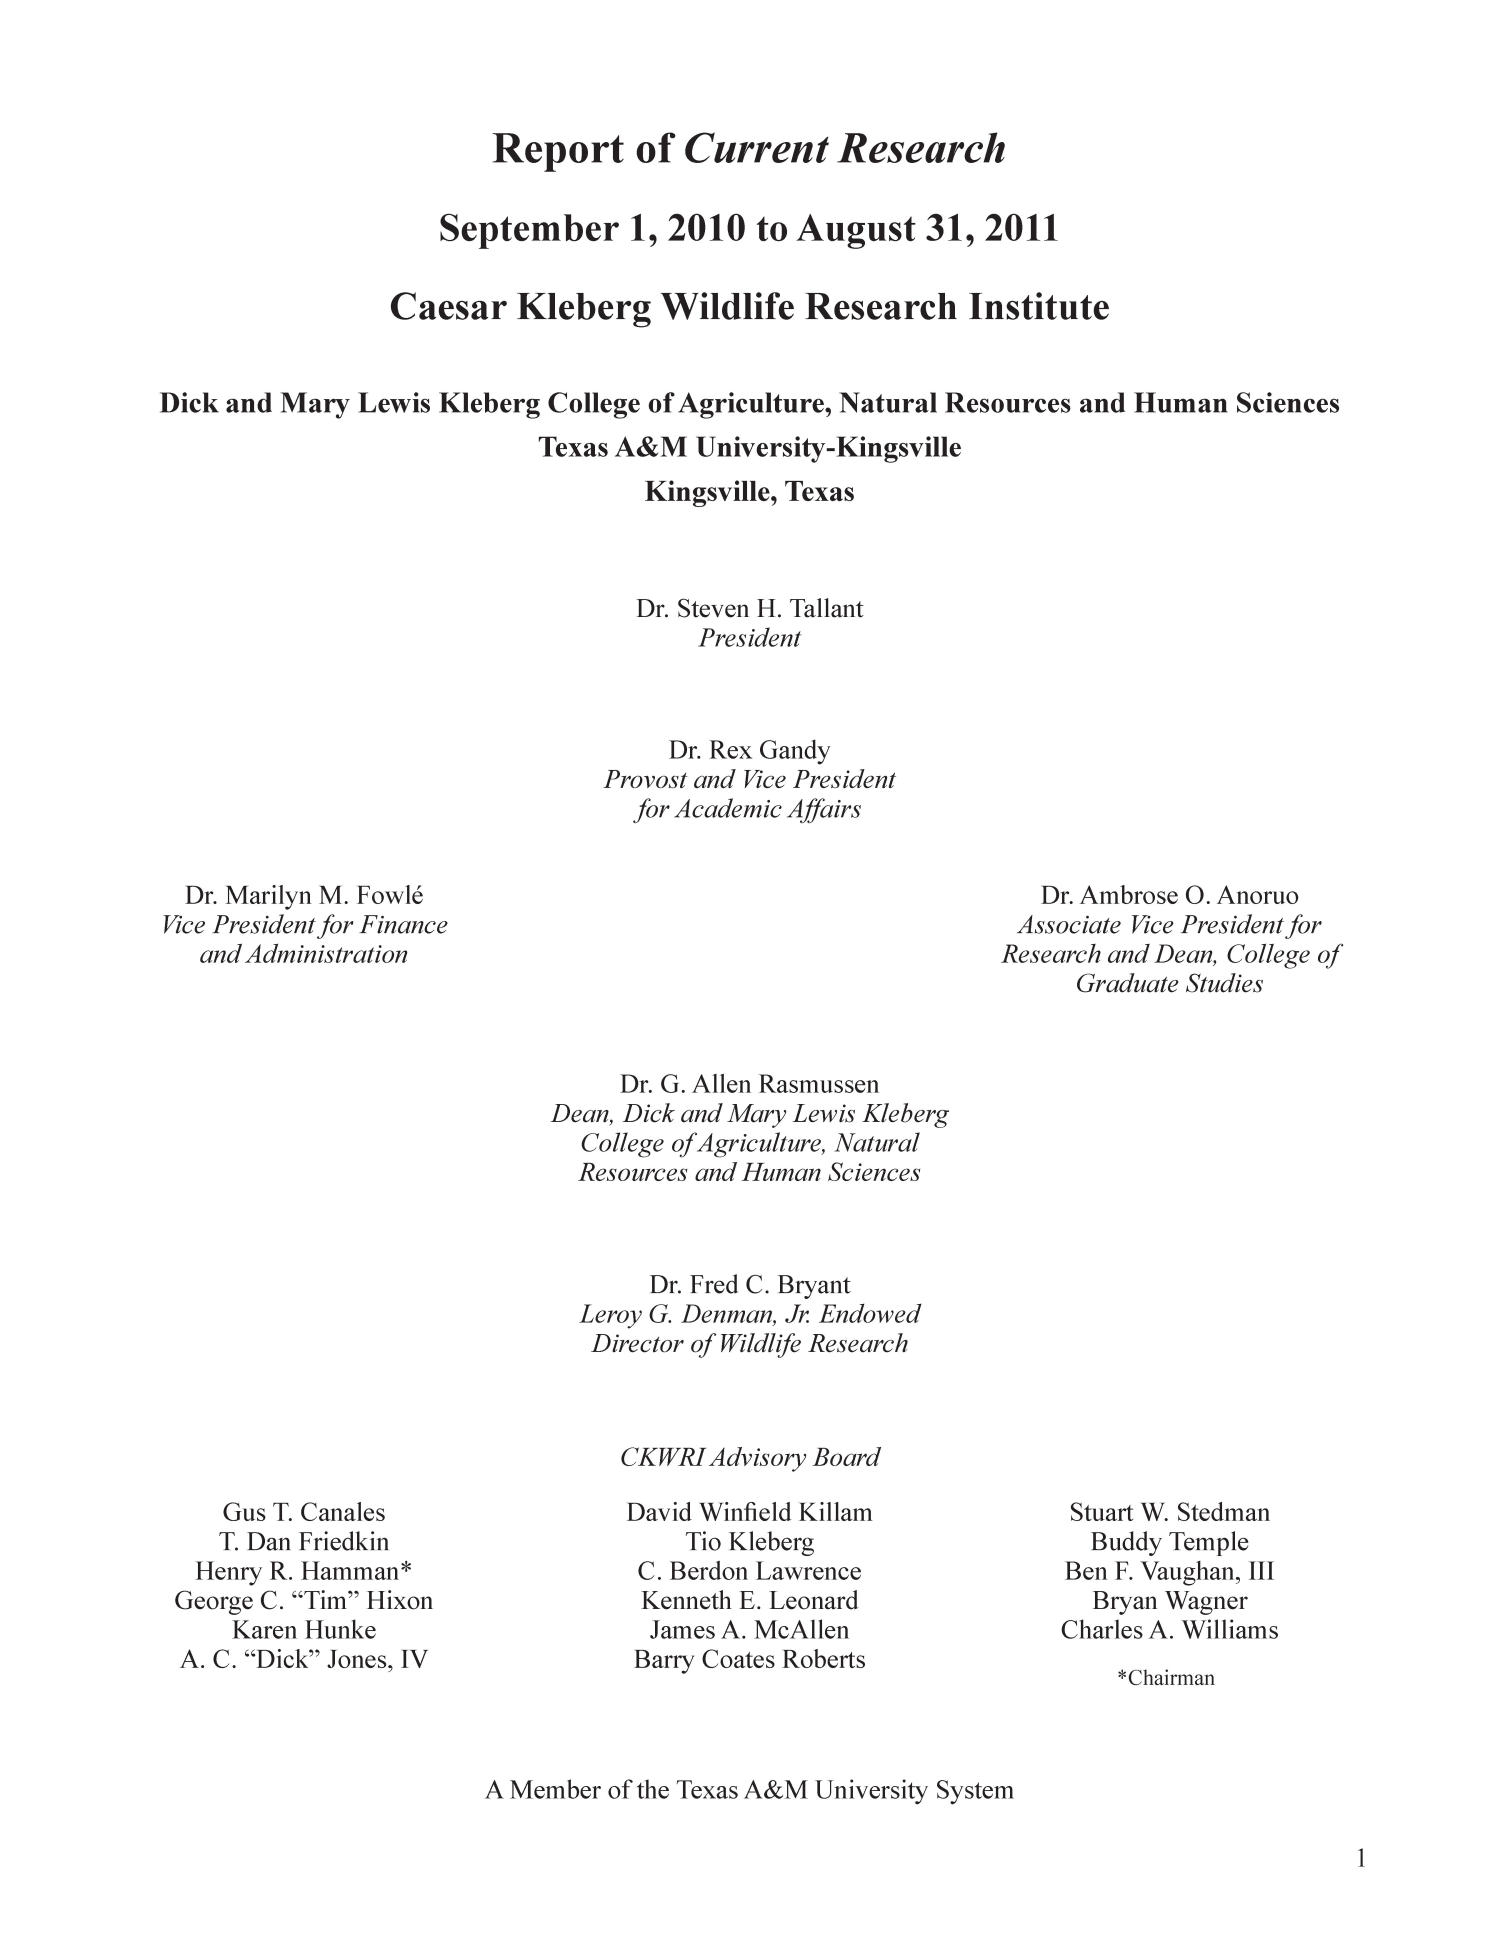 Caesar Kleberg Wildlife Research Institute Report of Current Research: 2011
                                                
                                                    Title Page
                                                